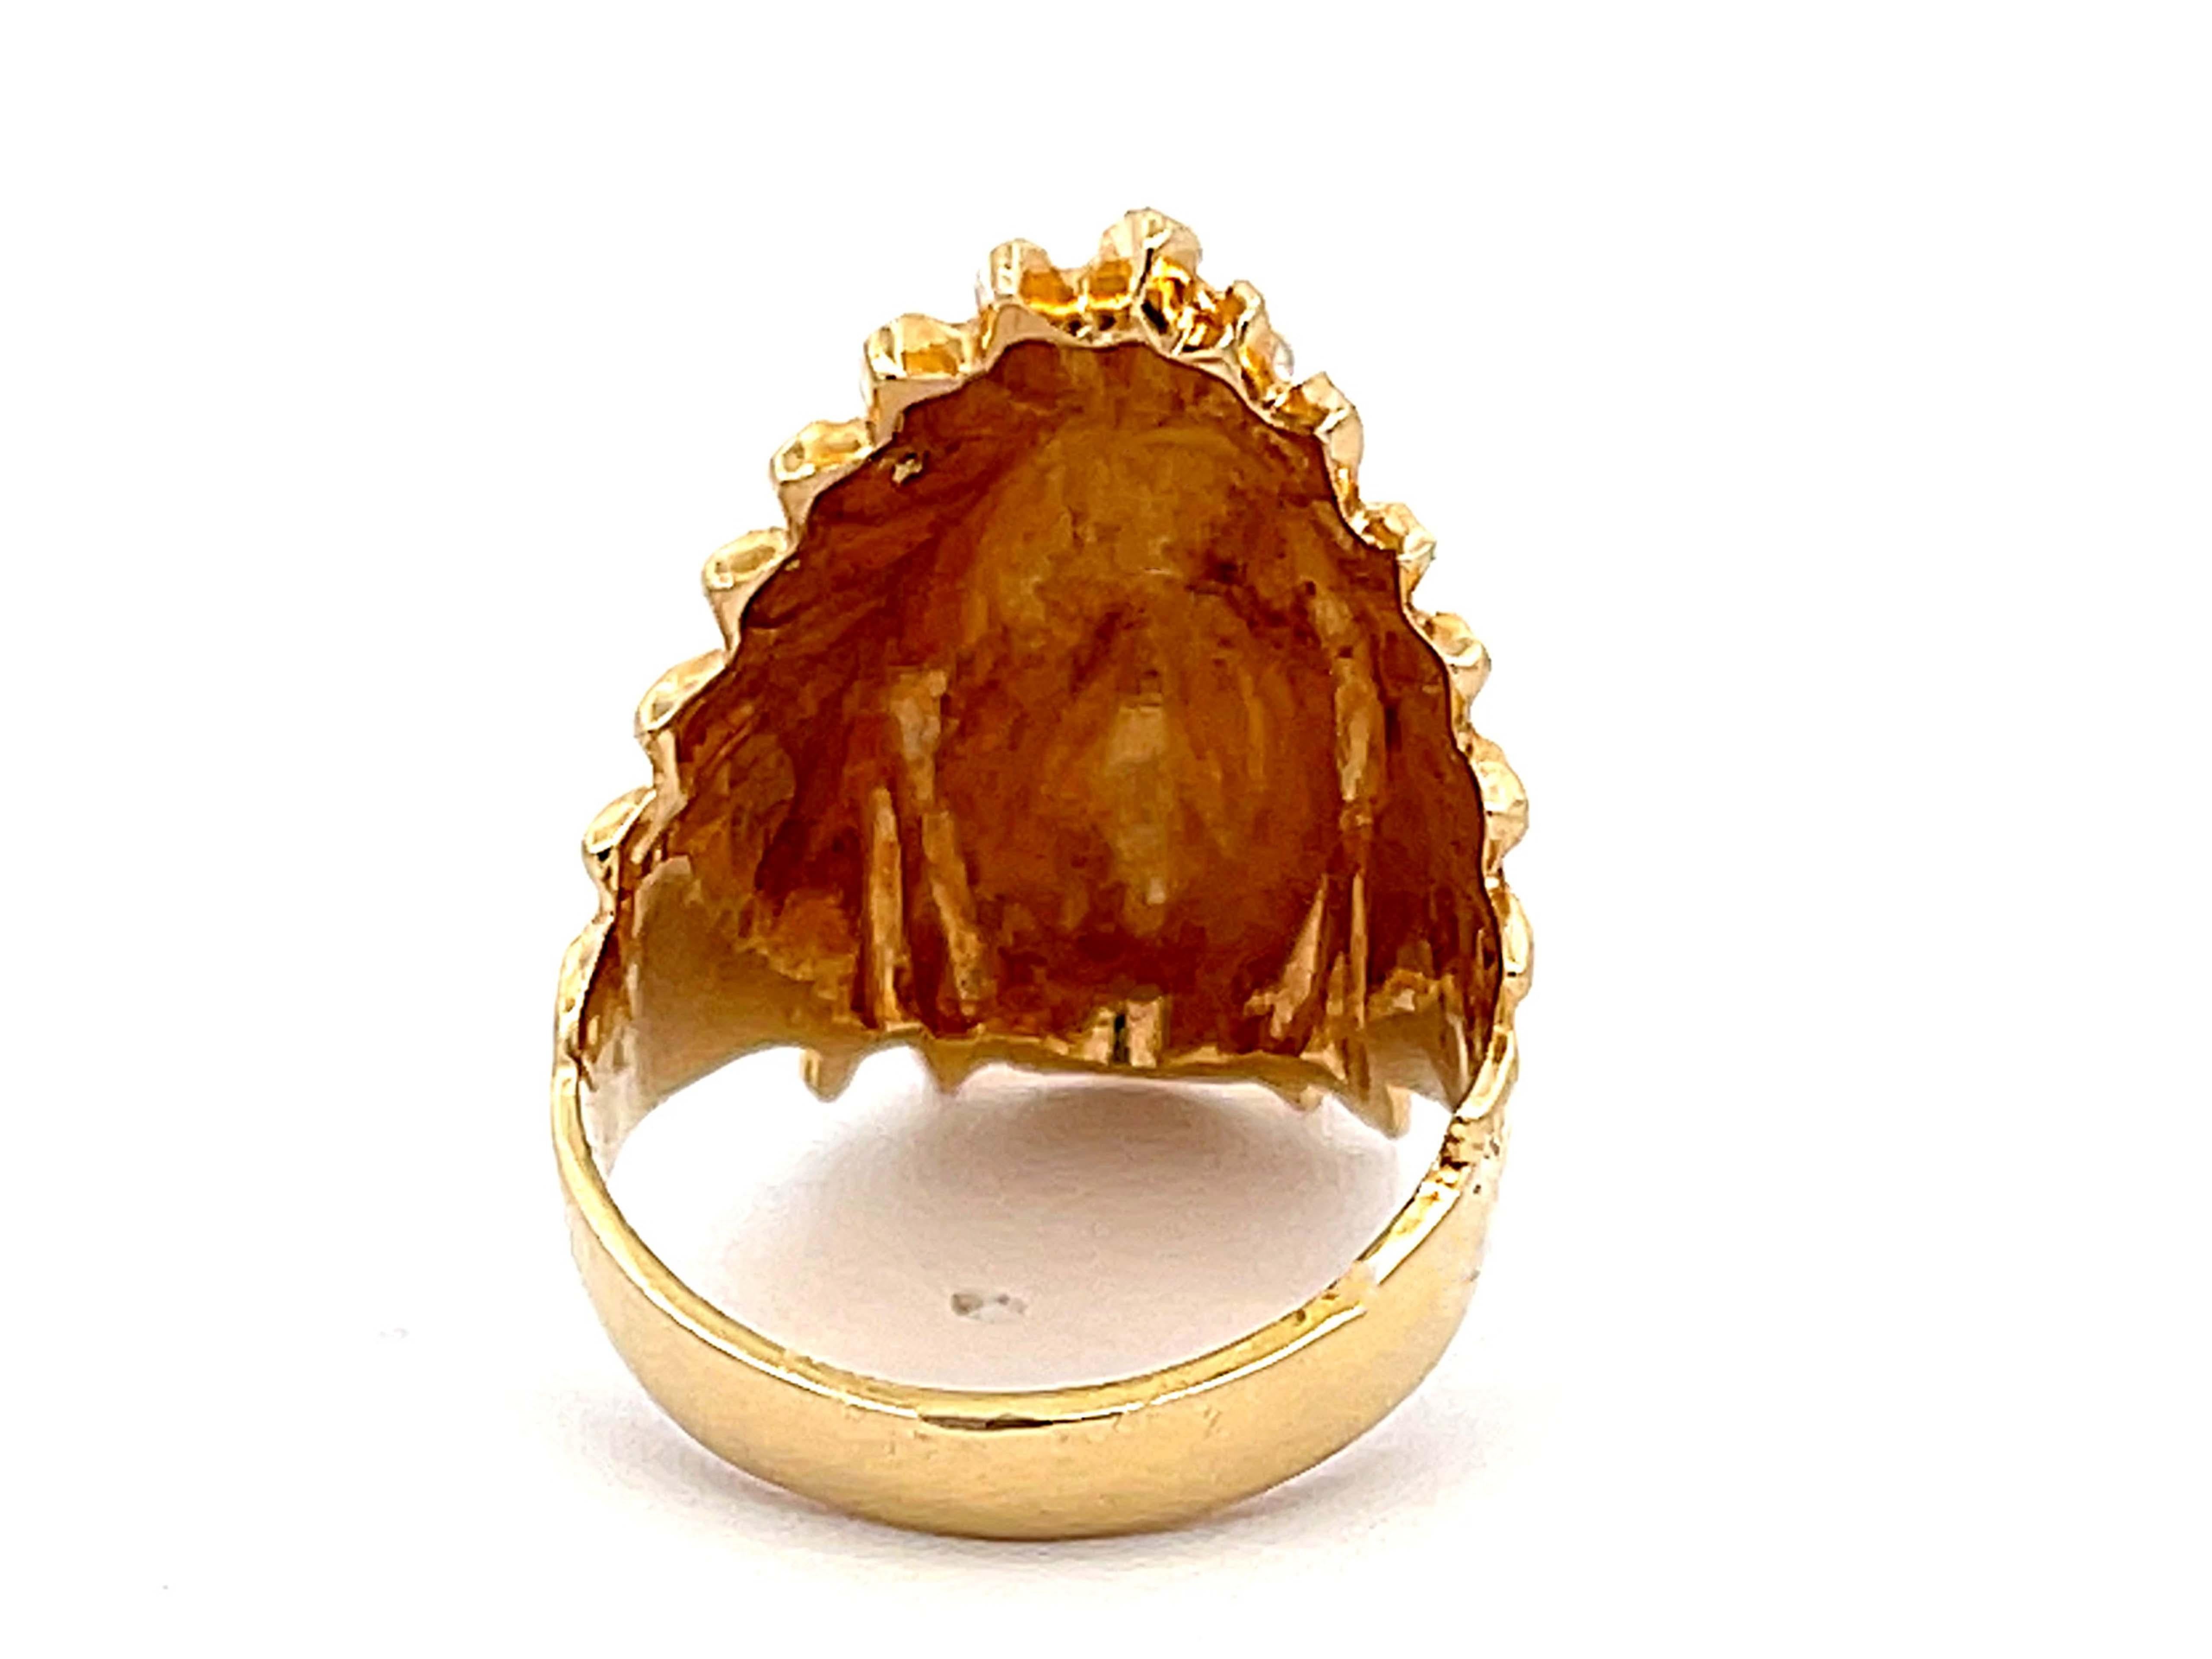 Indian Head Diamond Ring in 18k Yellow Gold In Excellent Condition For Sale In Honolulu, HI